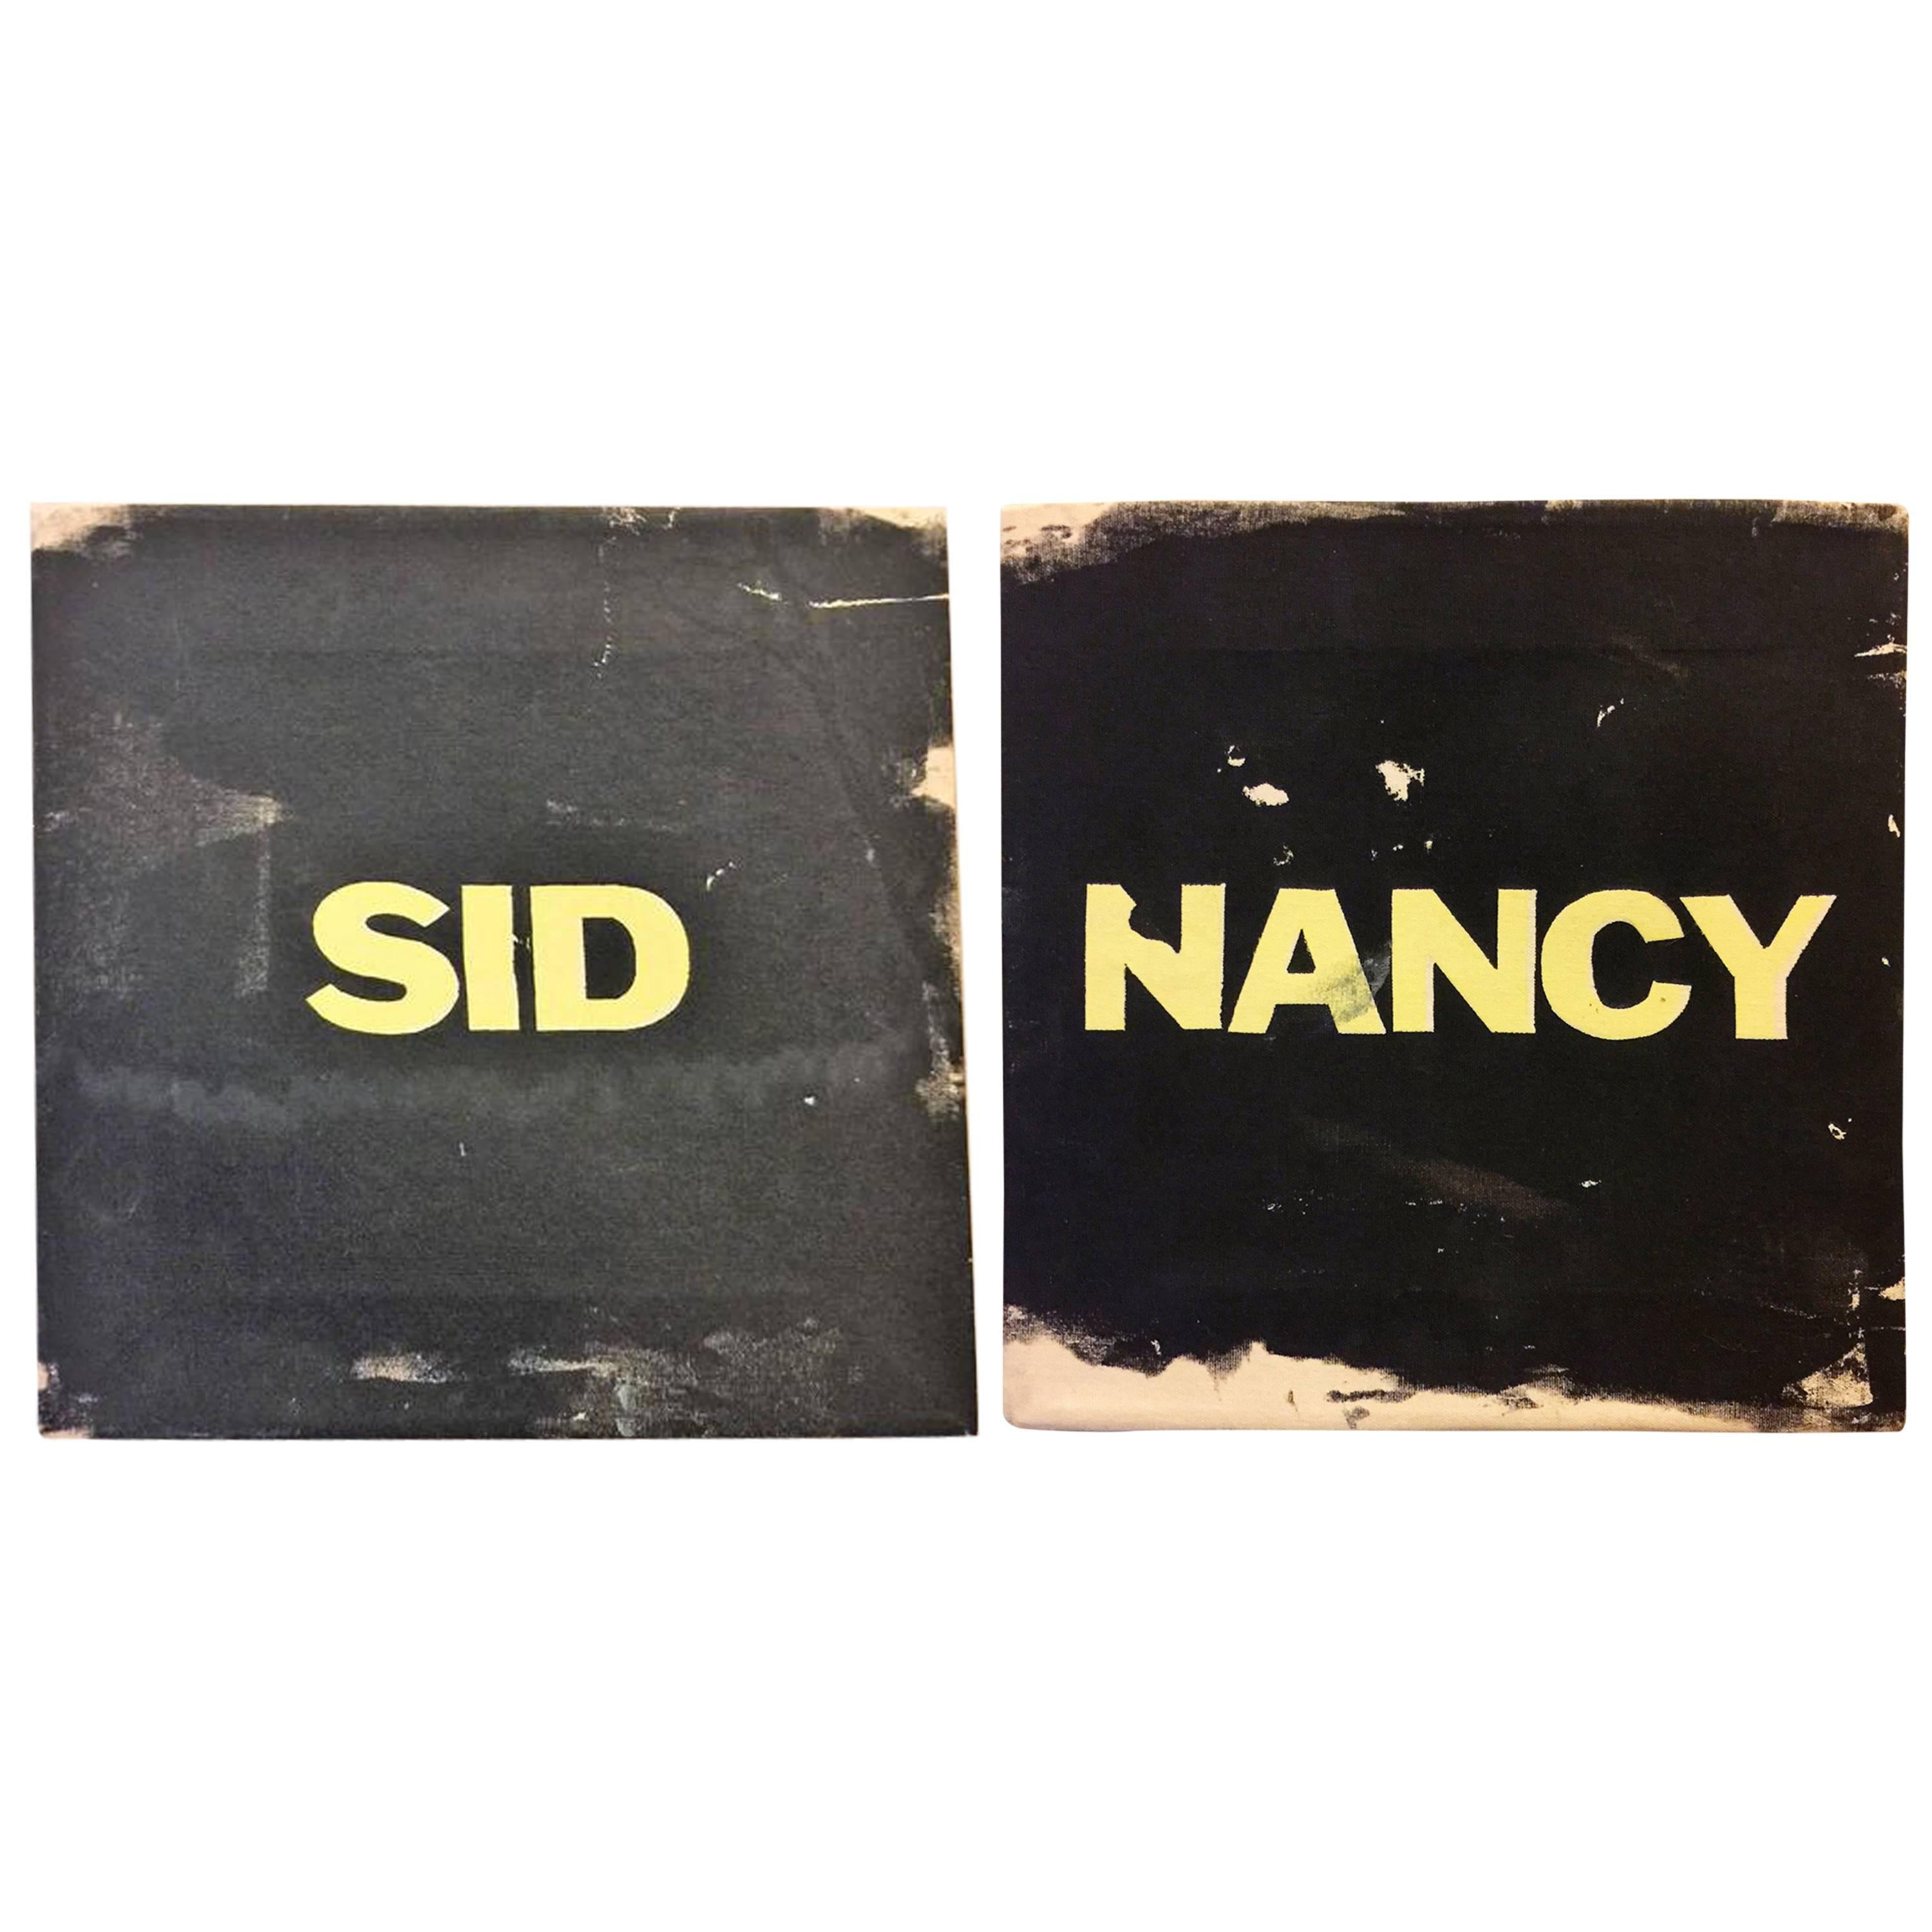 Pair of Sid and Nancy Graffiti Style Paintings on Canvas by Tim Goslin For Sale